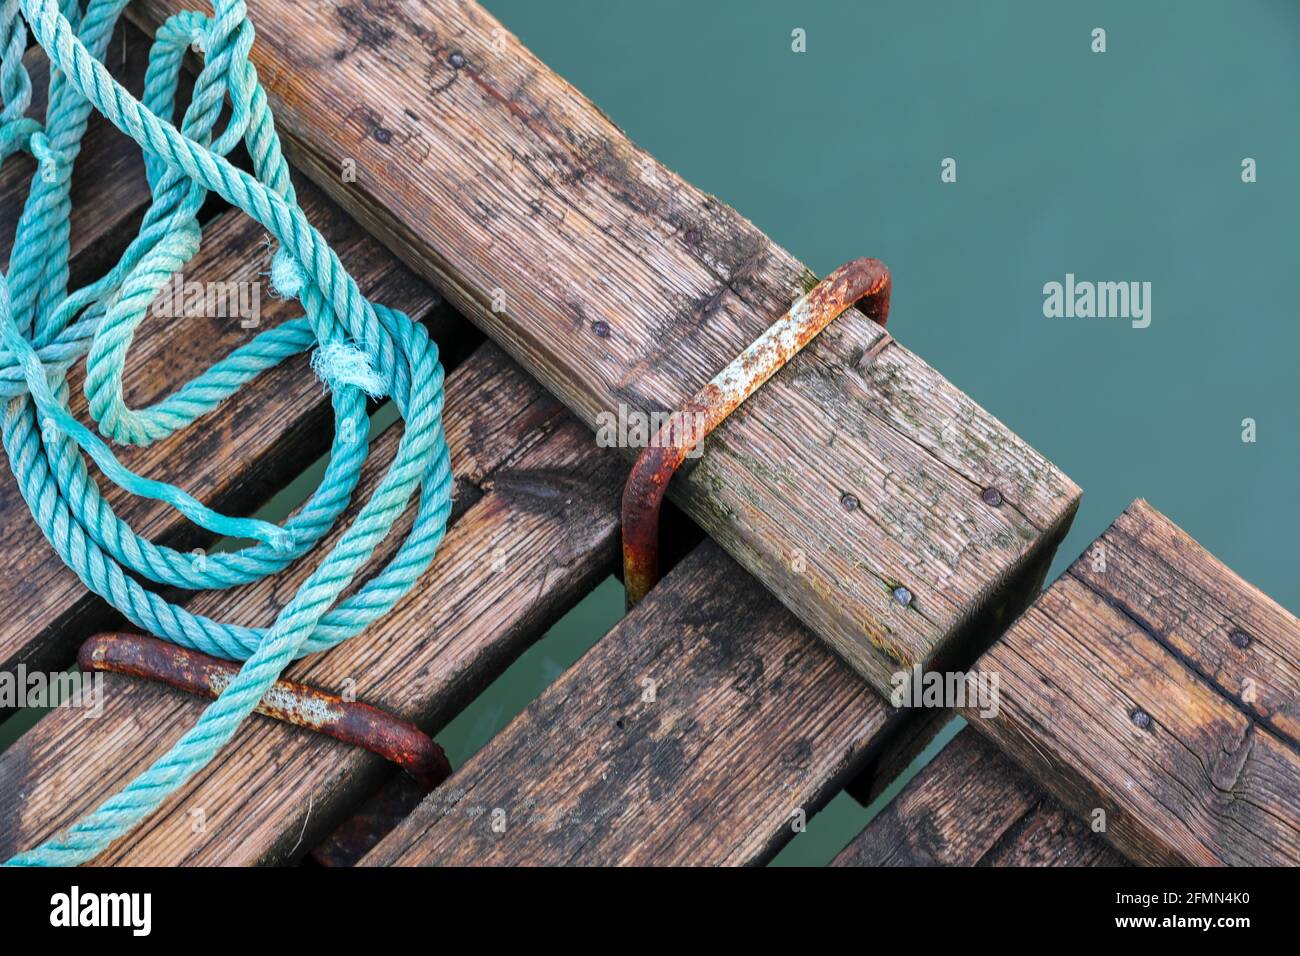 Wooden pier with blue sea. Wood floor or terrace beside the blue crystal clear water and a rope. Stock Photo